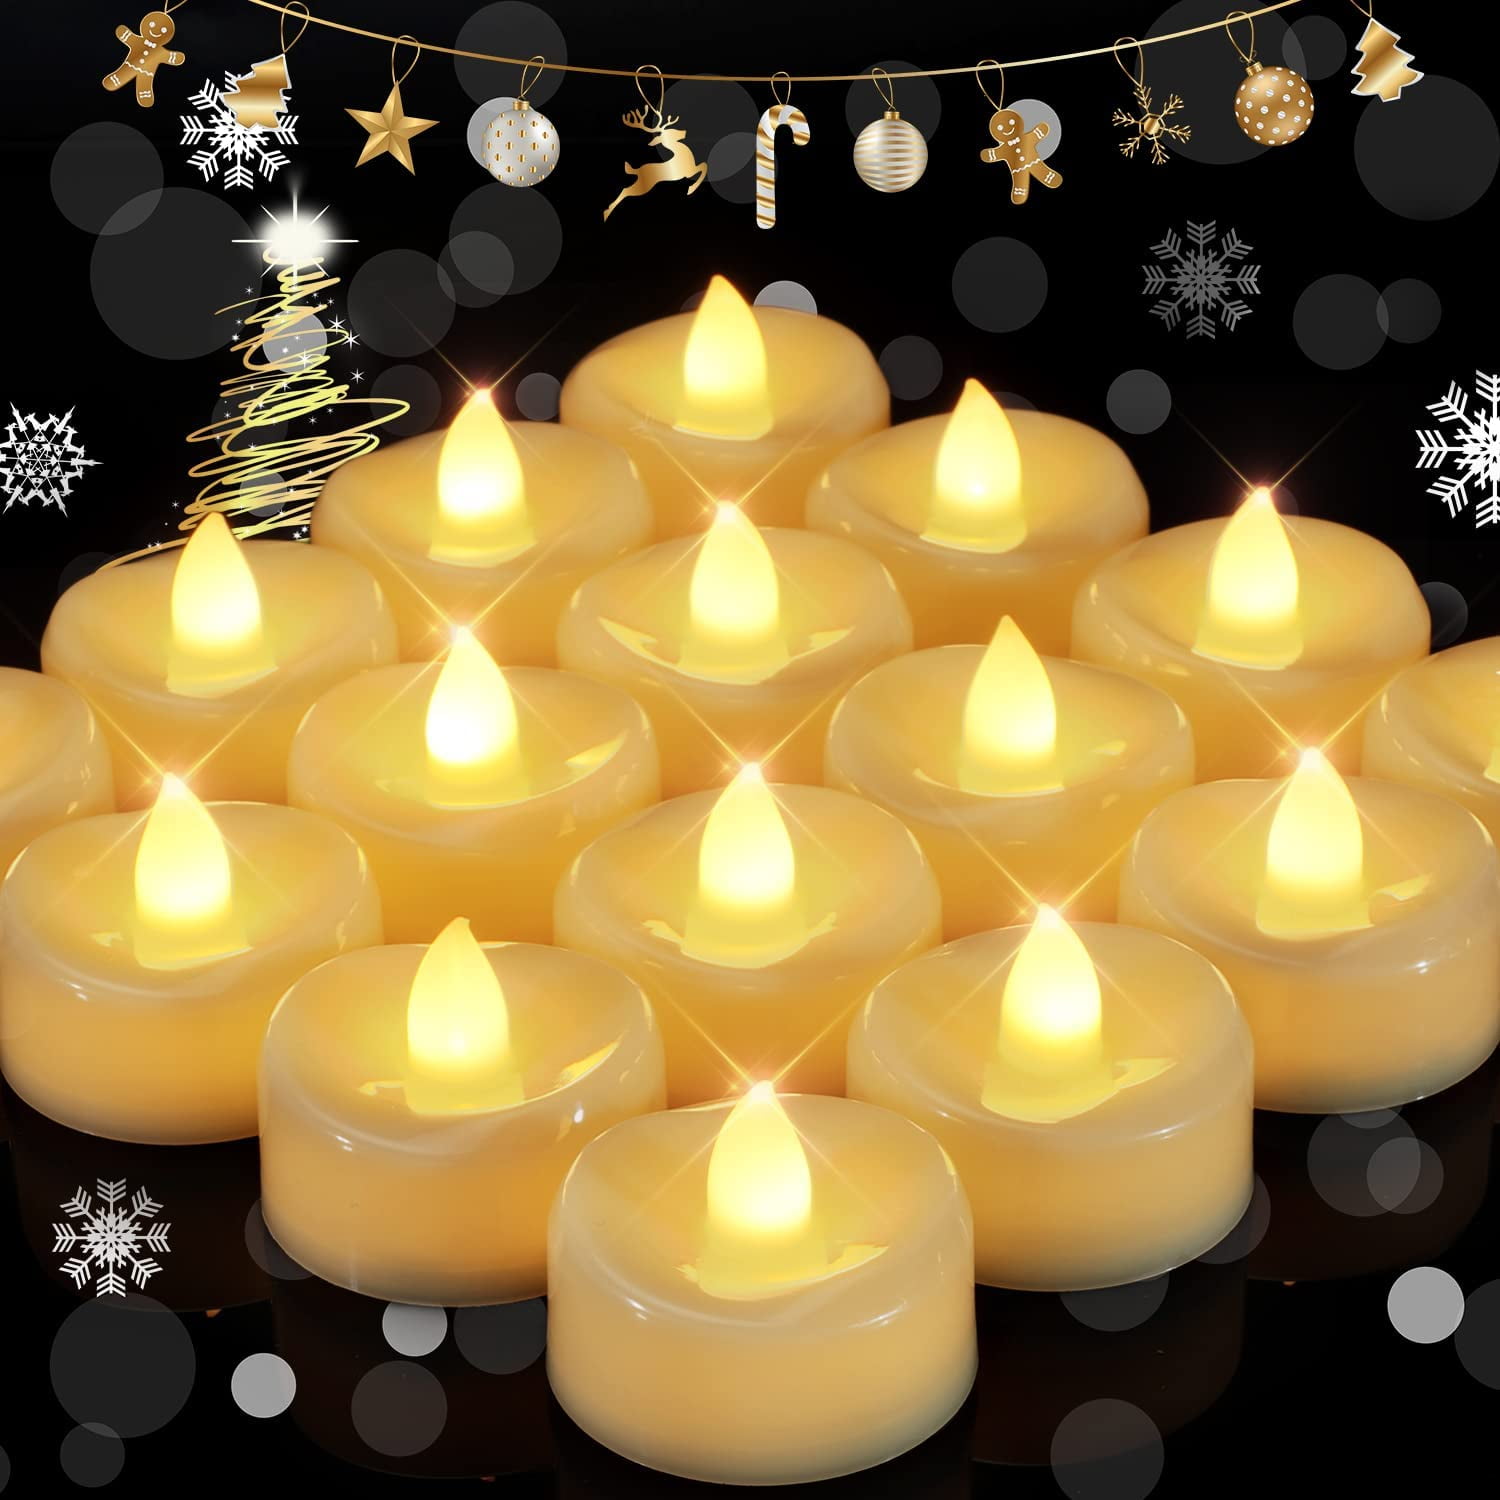  MTLEE 24 Pack Christmas Tealights Candles LED Flameless Tea  Lights Candy Cane Striped Red Green Tealight Warm Yellow Tealight Votive  Candles for Parties, Weddings, Birthdays and Home Decor : Tools 